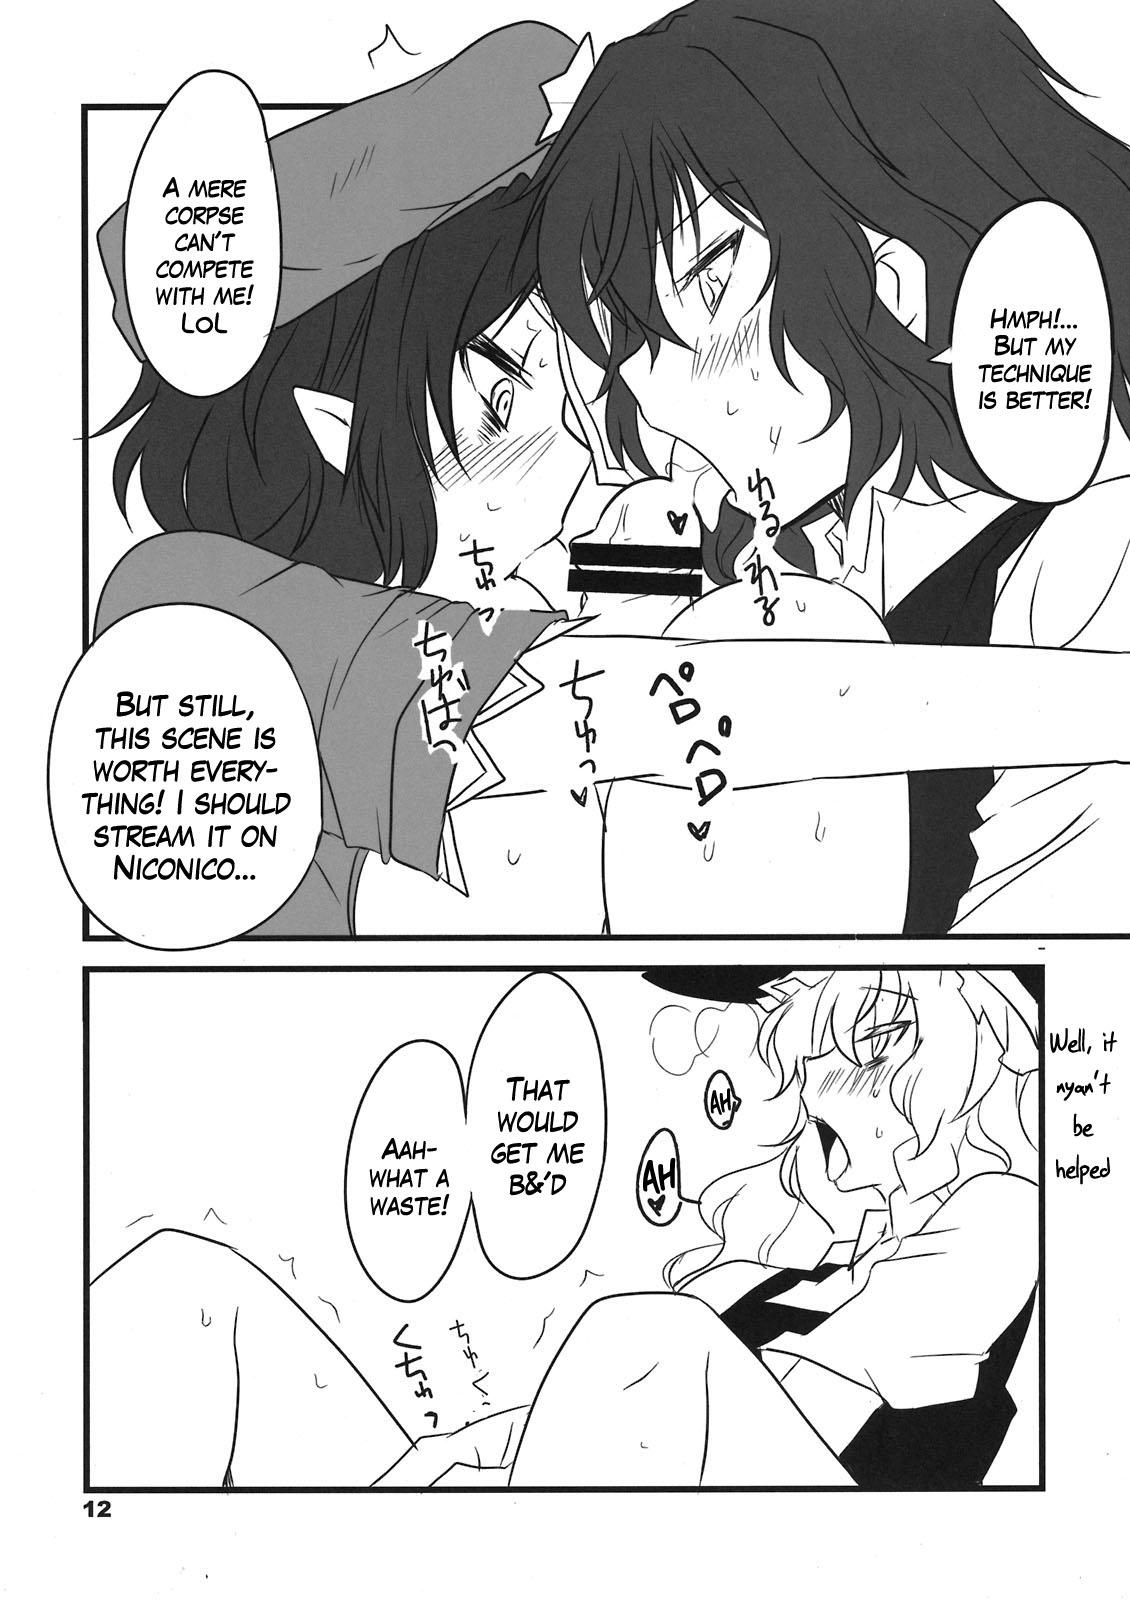 Webcamsex Tabechauzo? | You Gonna Be Eaten! - Touhou project Naked Sex - Page 12